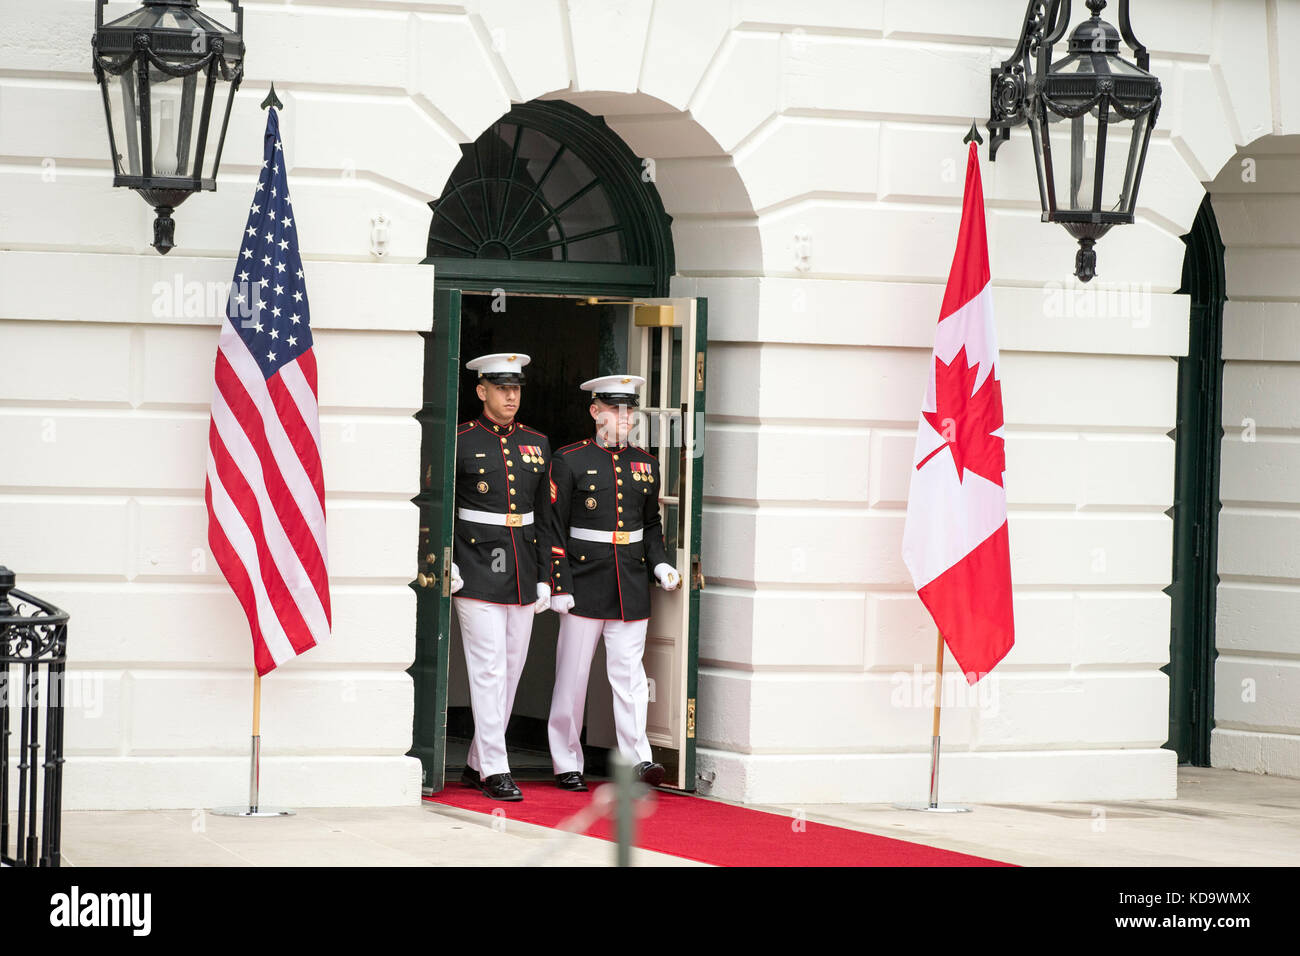 Washington DC, USA. 11th Oct, 2017. Two United States Marines walk through the door of the South portico of the White House prior to the arrival of the Prime Minister of Canada Justin Trudeau and his wife Sophie Grégoire at the White House on October 11th, 2017 in Washington, DC Credit: Alex Edelman/CNP /MediaPunch Credit: MediaPunch Inc/Alamy Live News Stock Photo